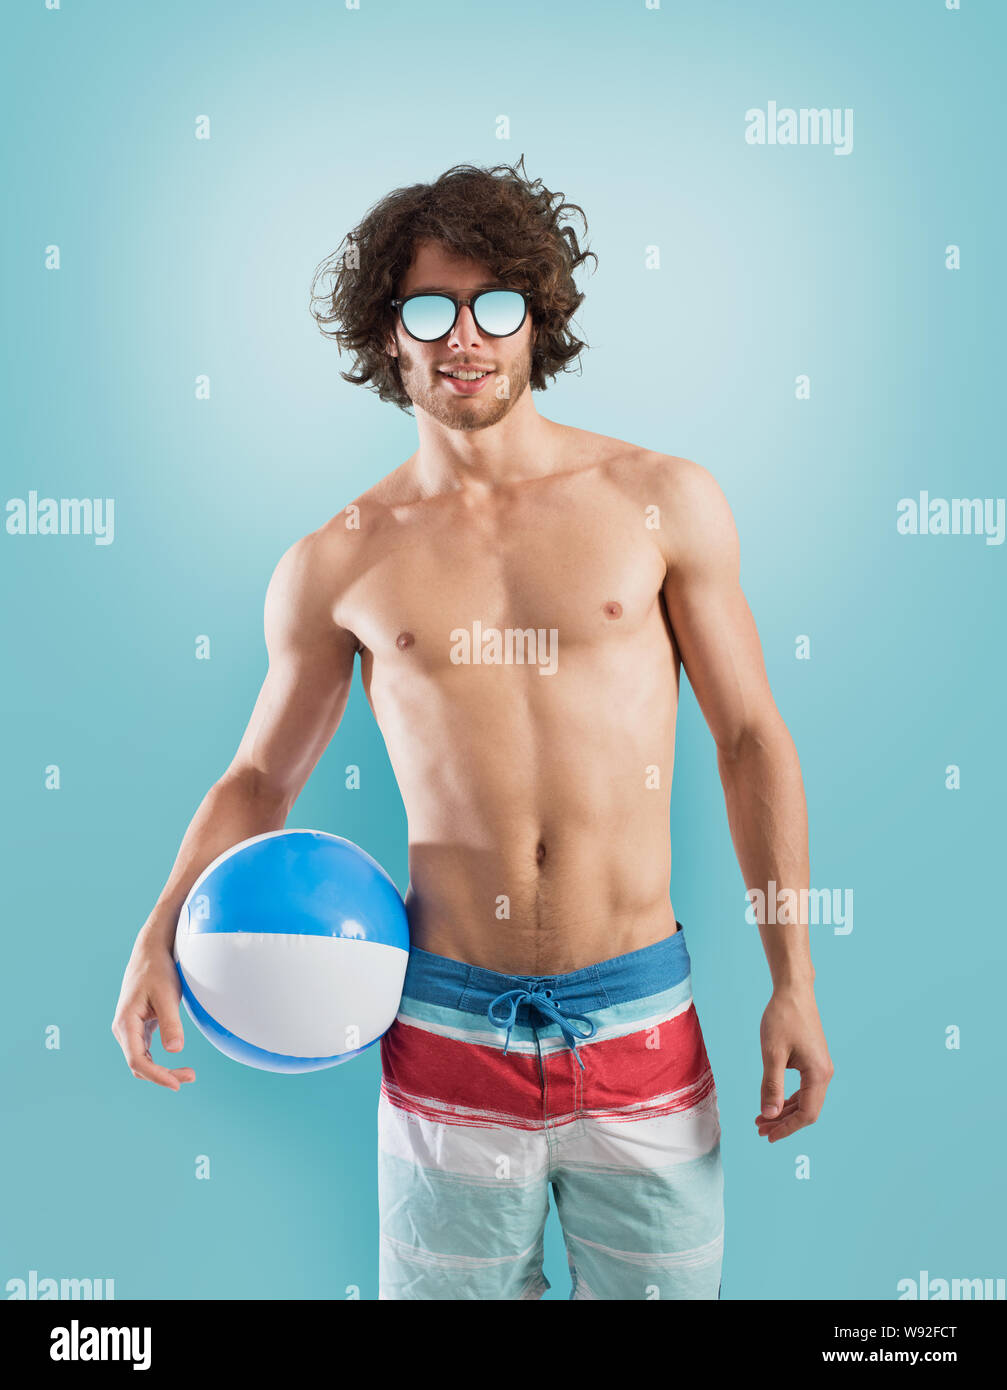 Boy with swimsuit on light blue background Stock Photo